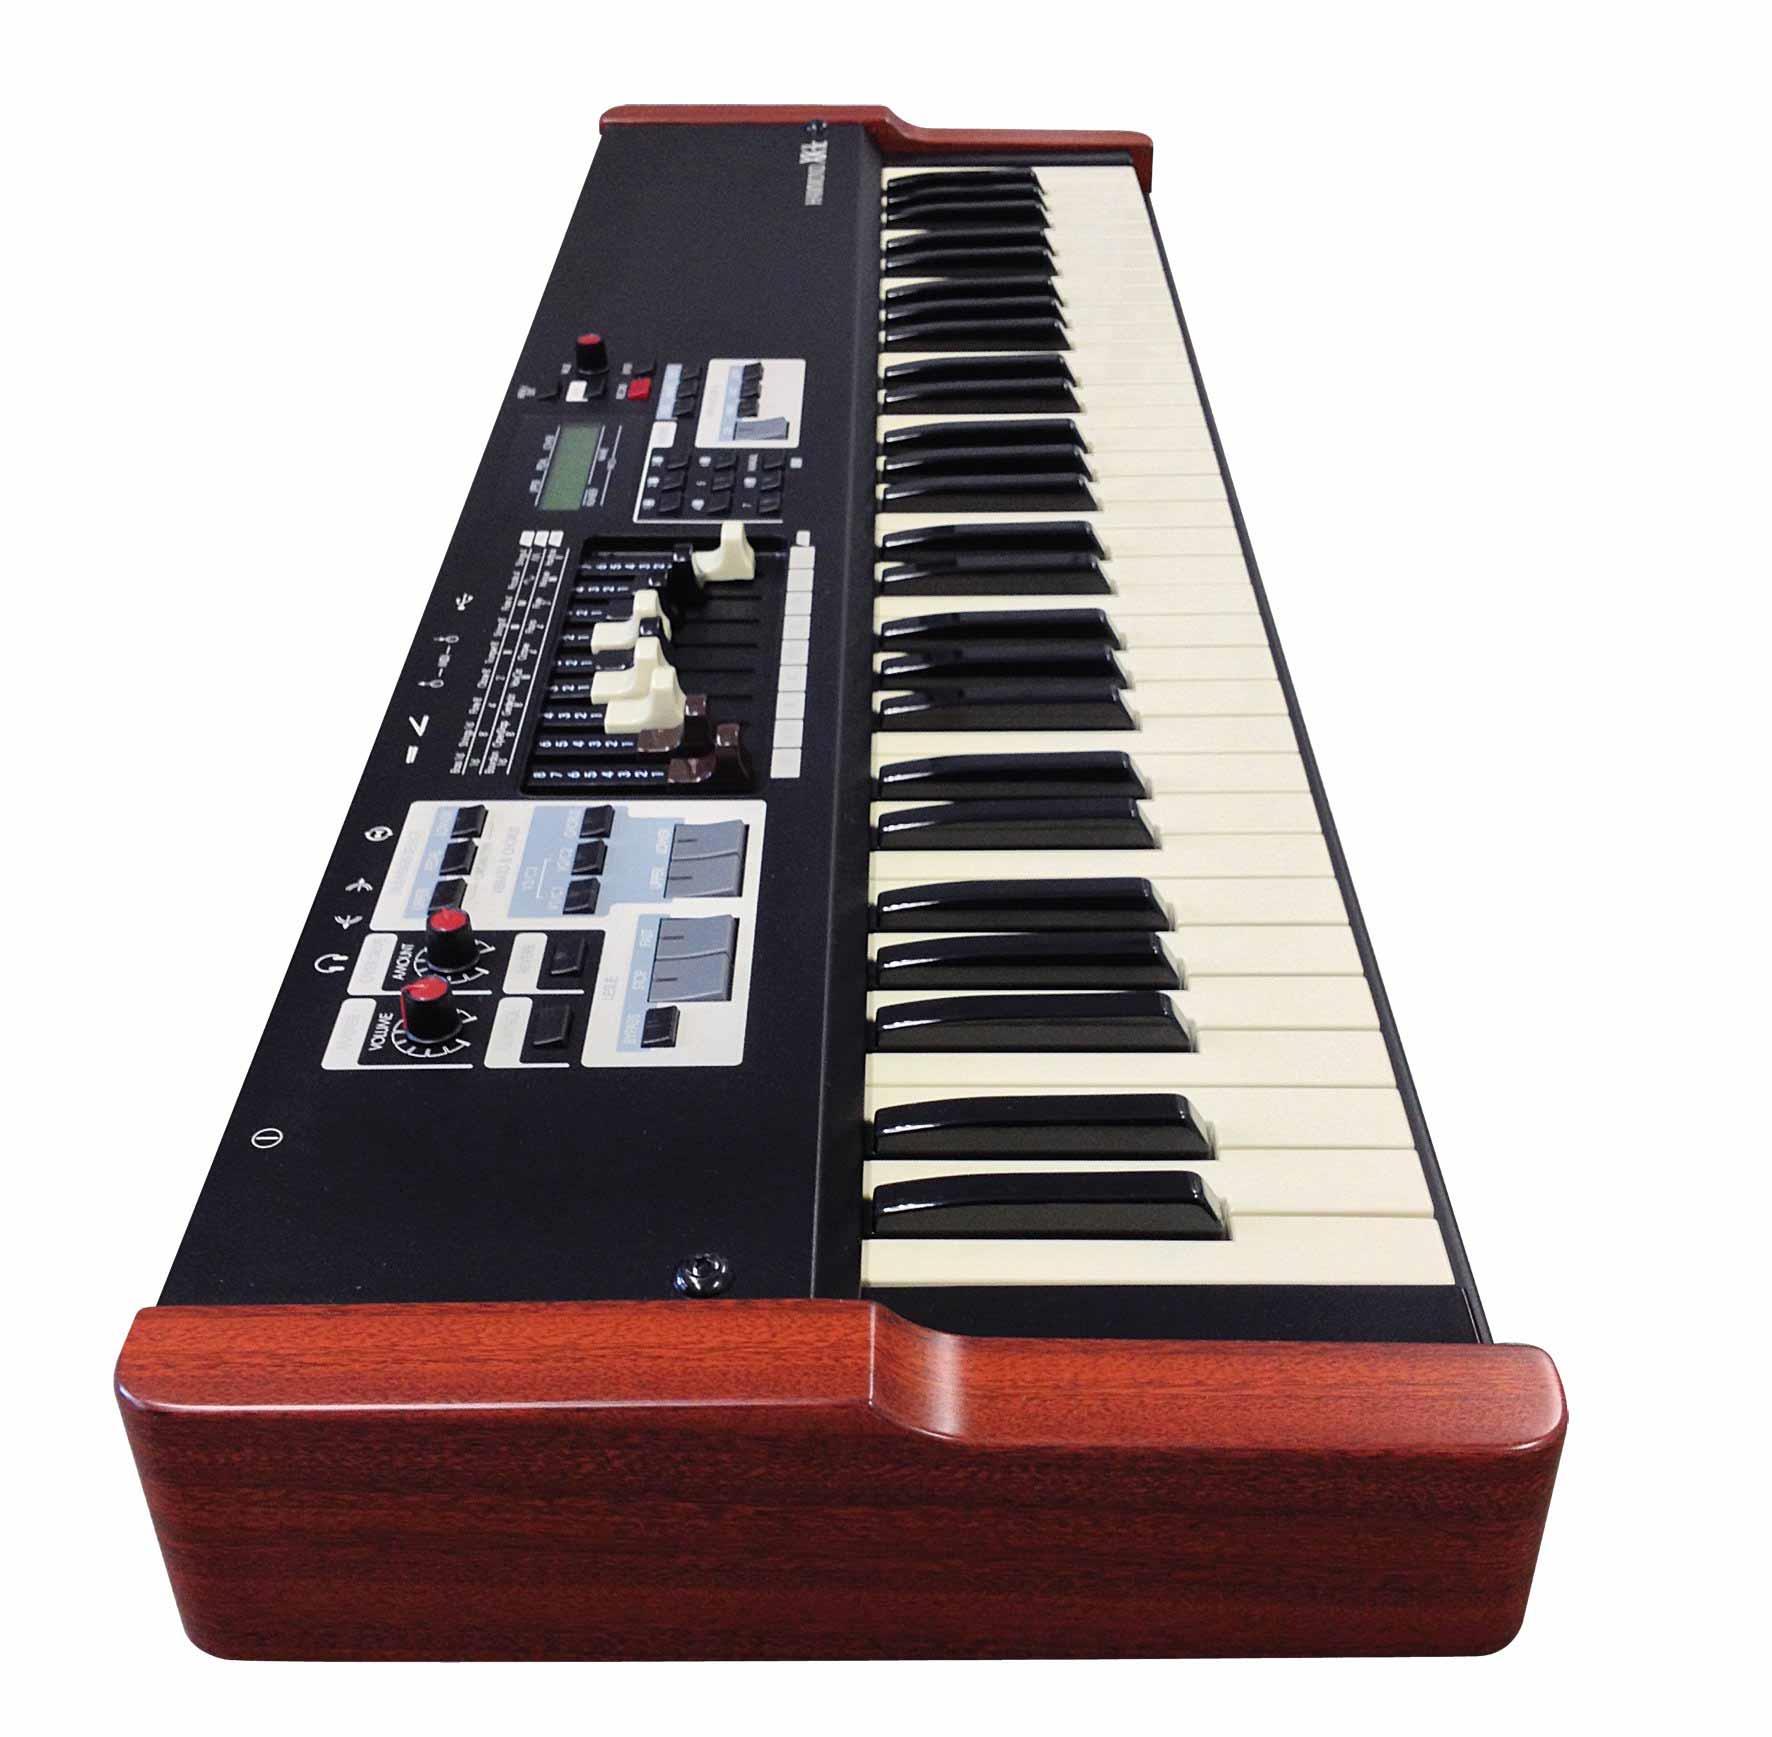 Hammond XK-1c keyboard. The Perfect choise. Buy it today